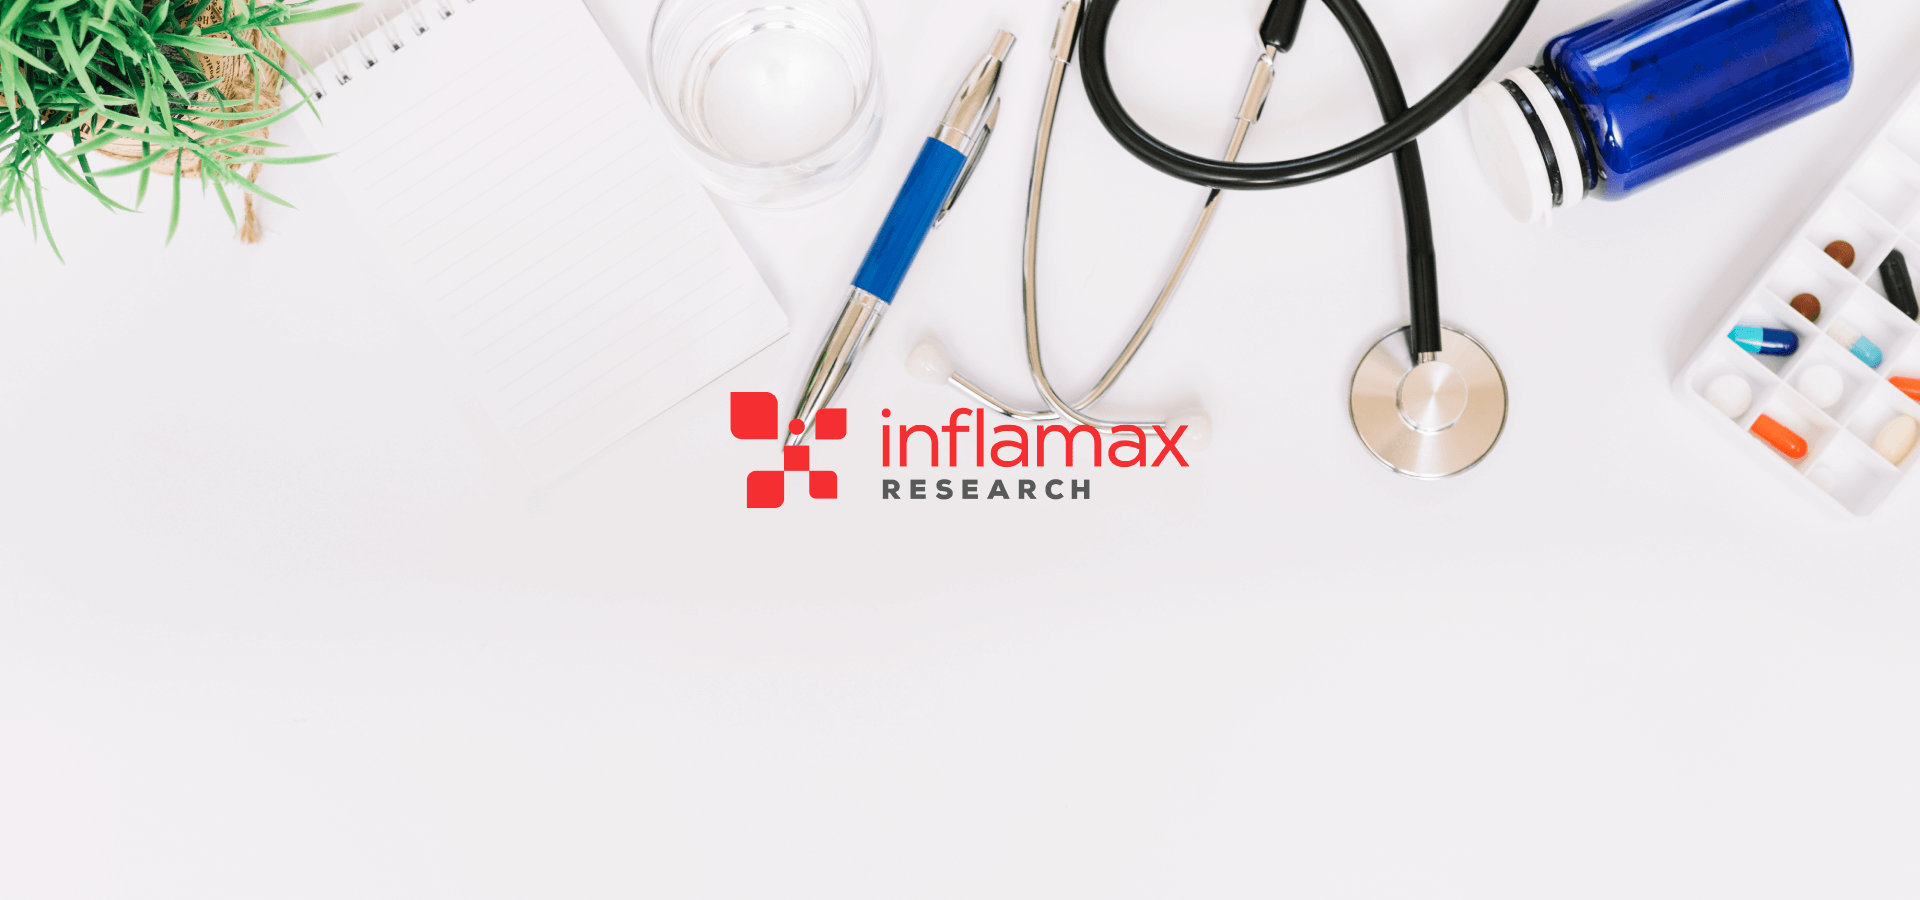 Inflamax Research